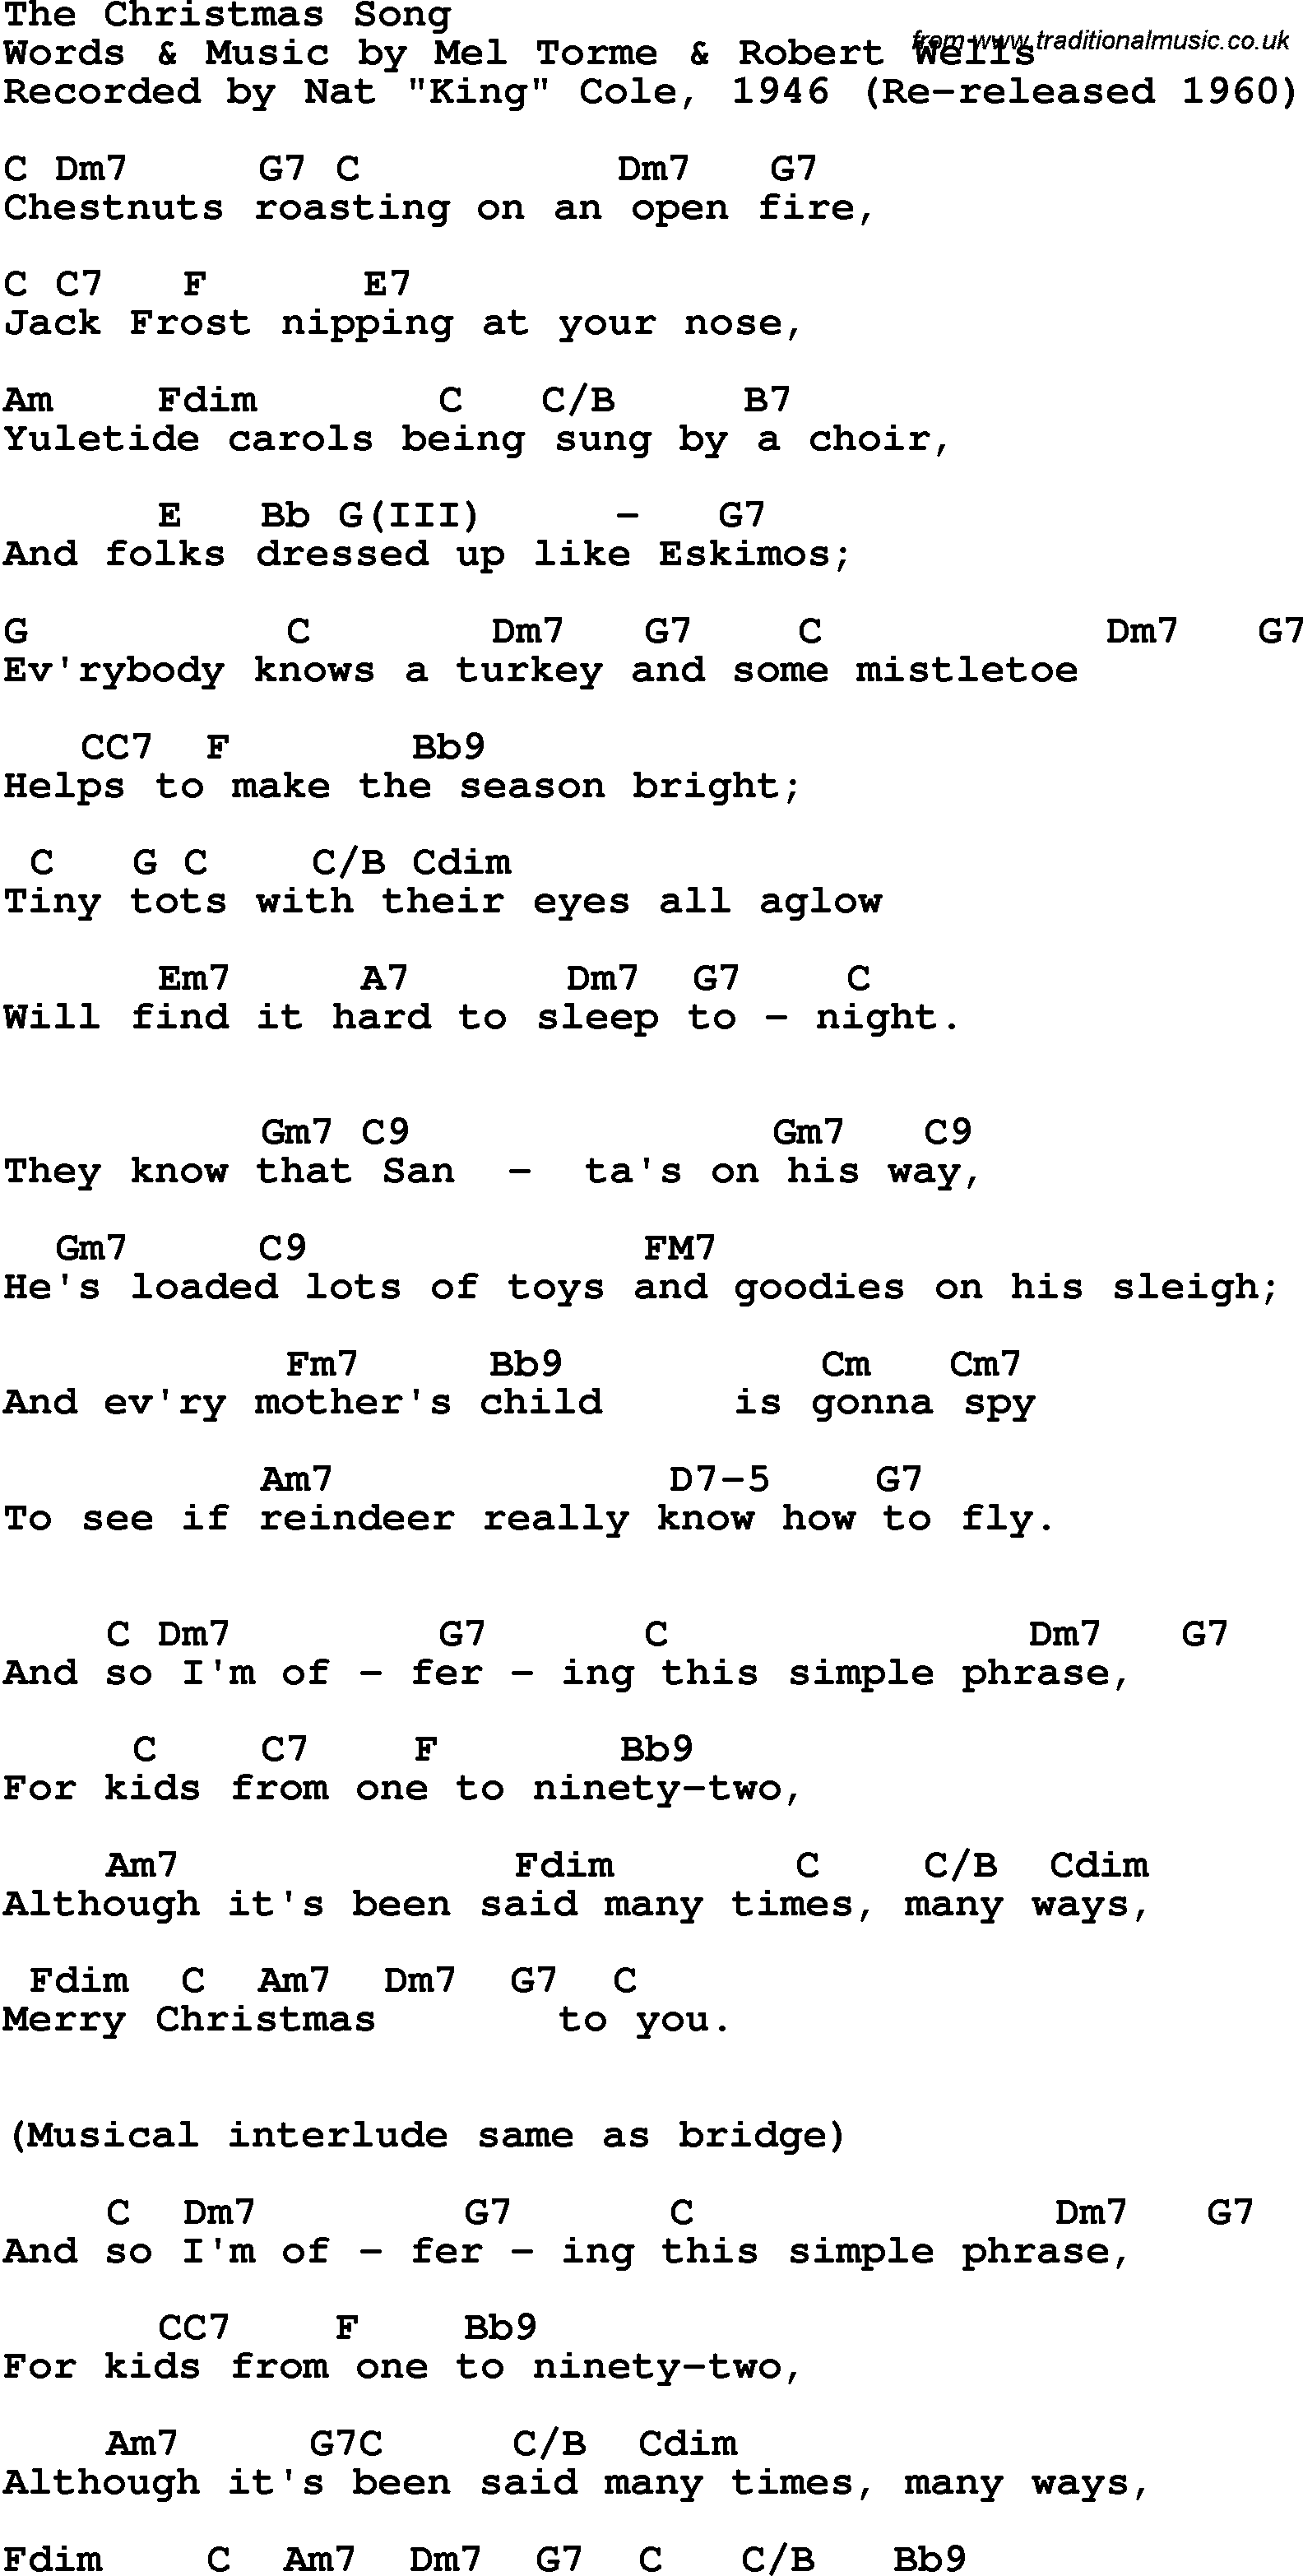 Song Lyrics with guitar chords for Christmas Song, The - Nat King Cole, 1946